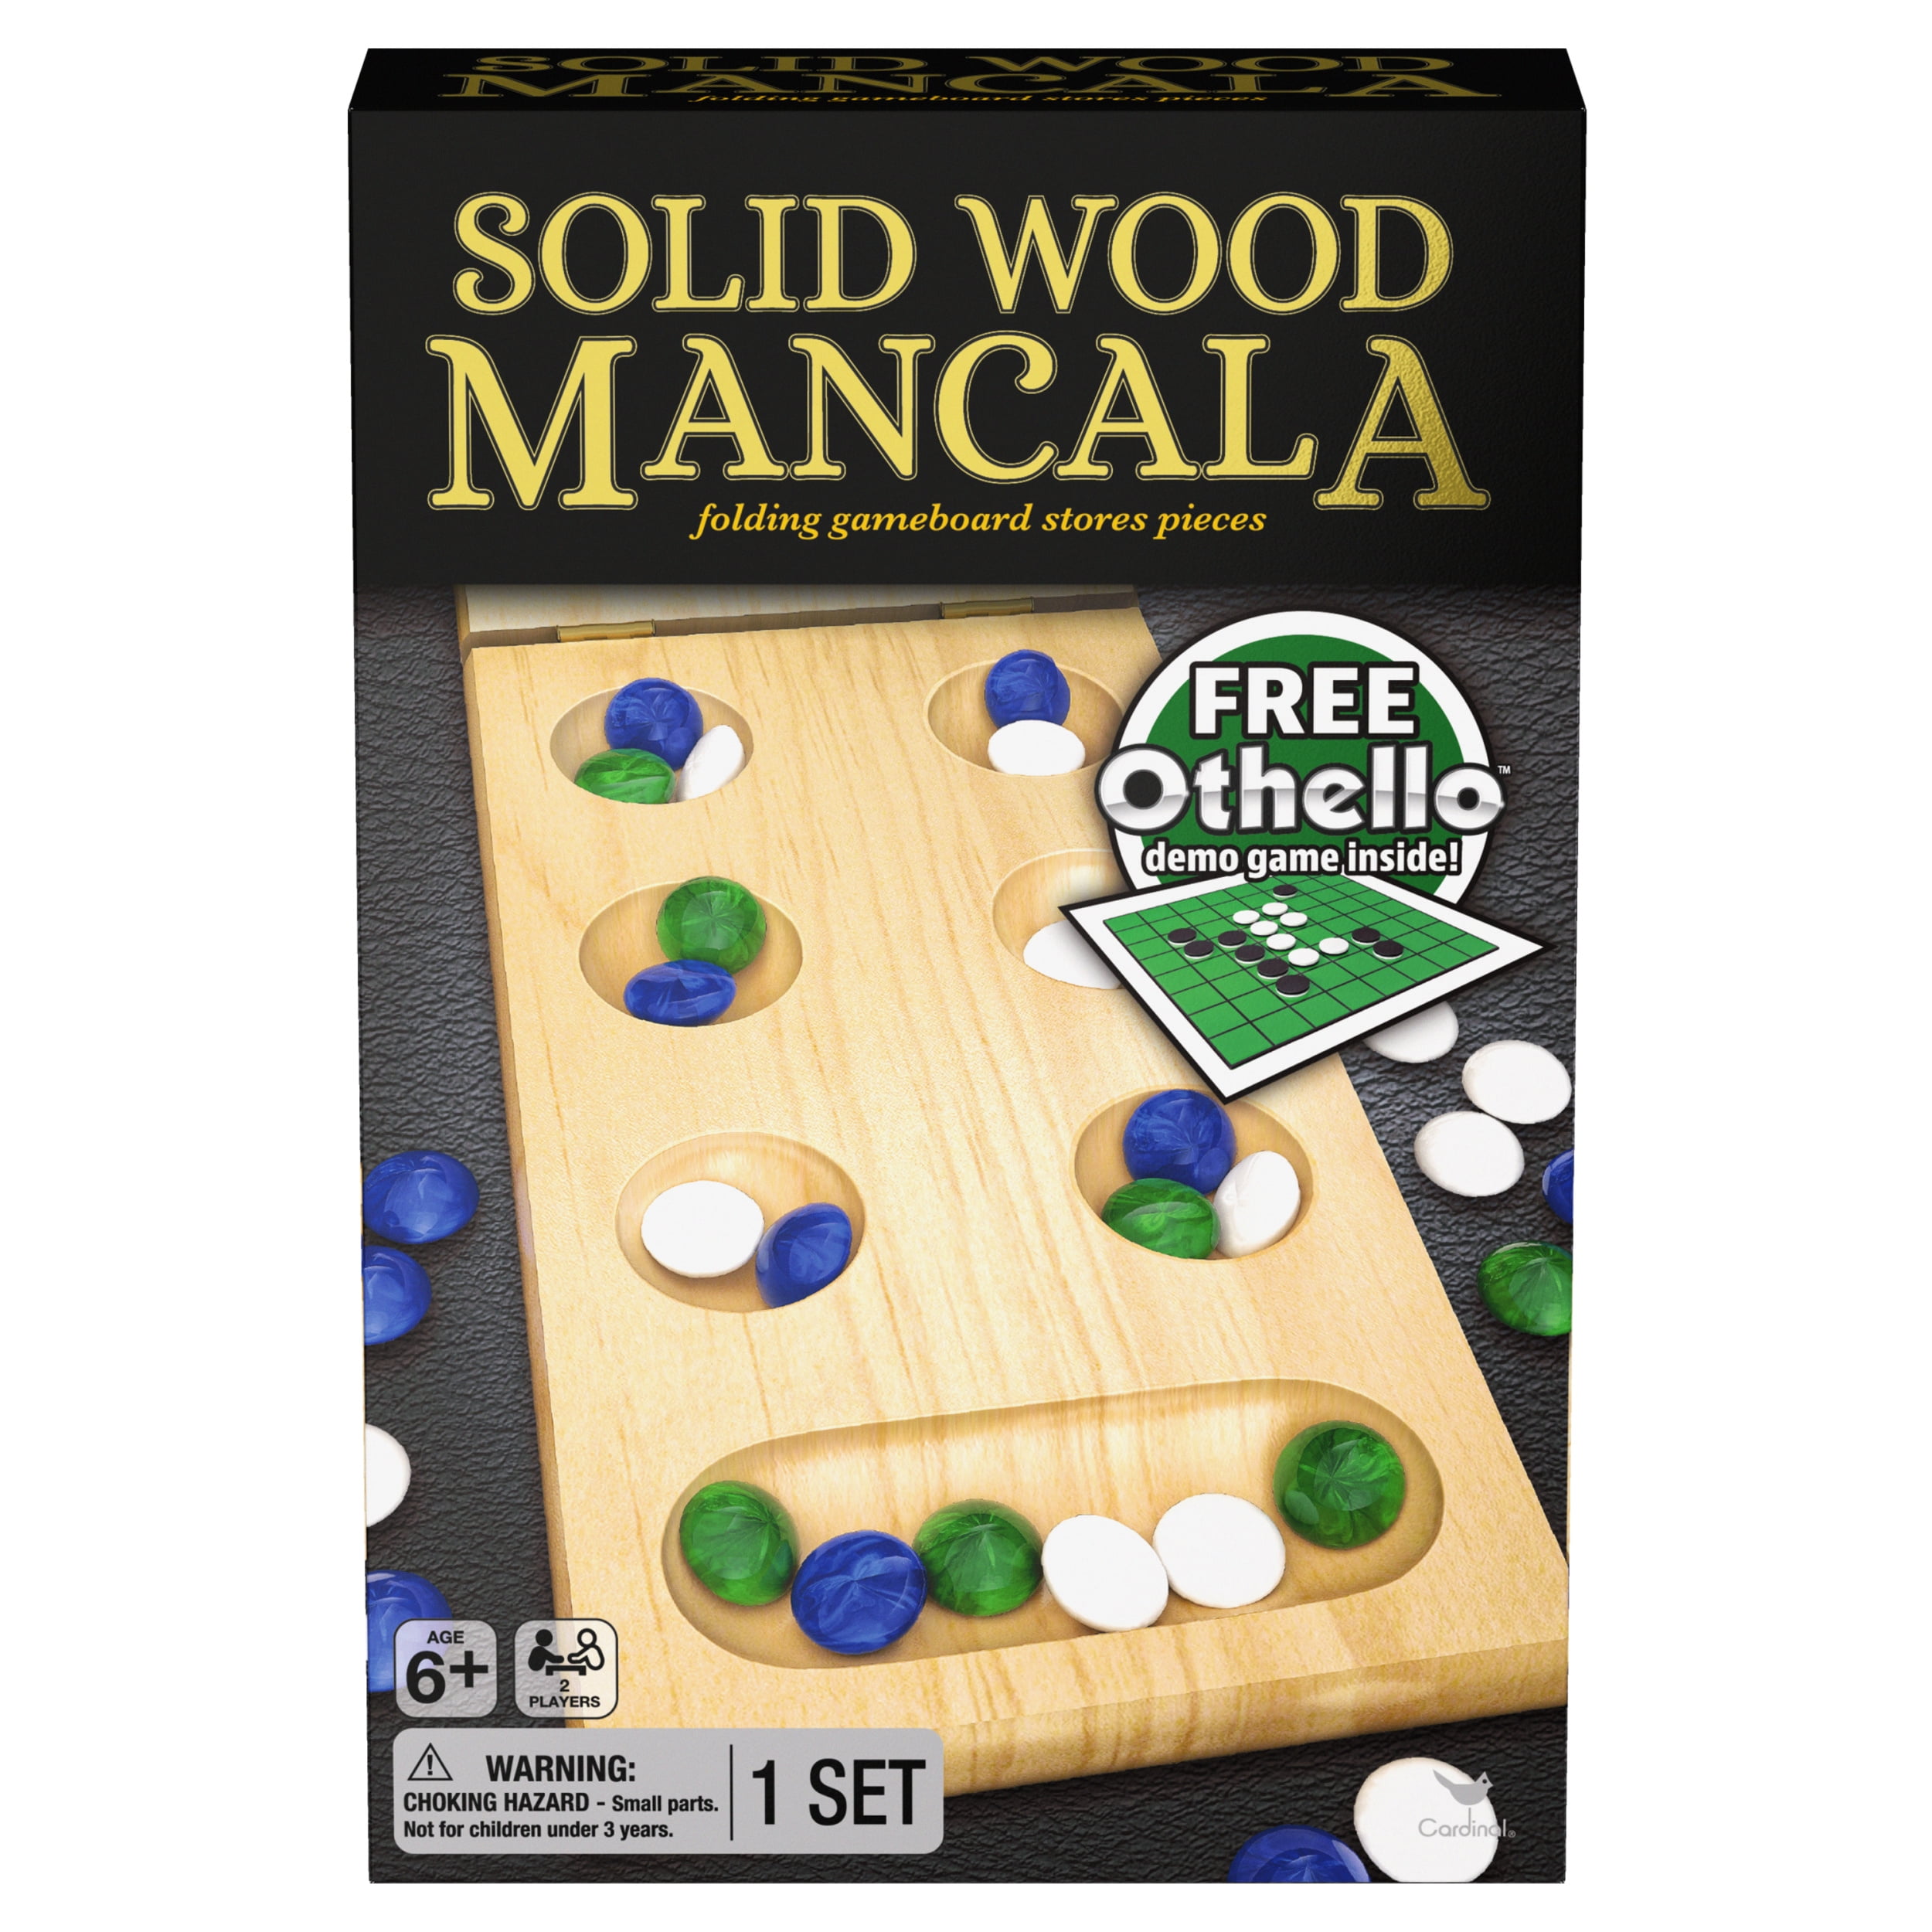 Deluxe Wood Mancala by Cardinal Learningsmith SG_B00000JD4Q_US